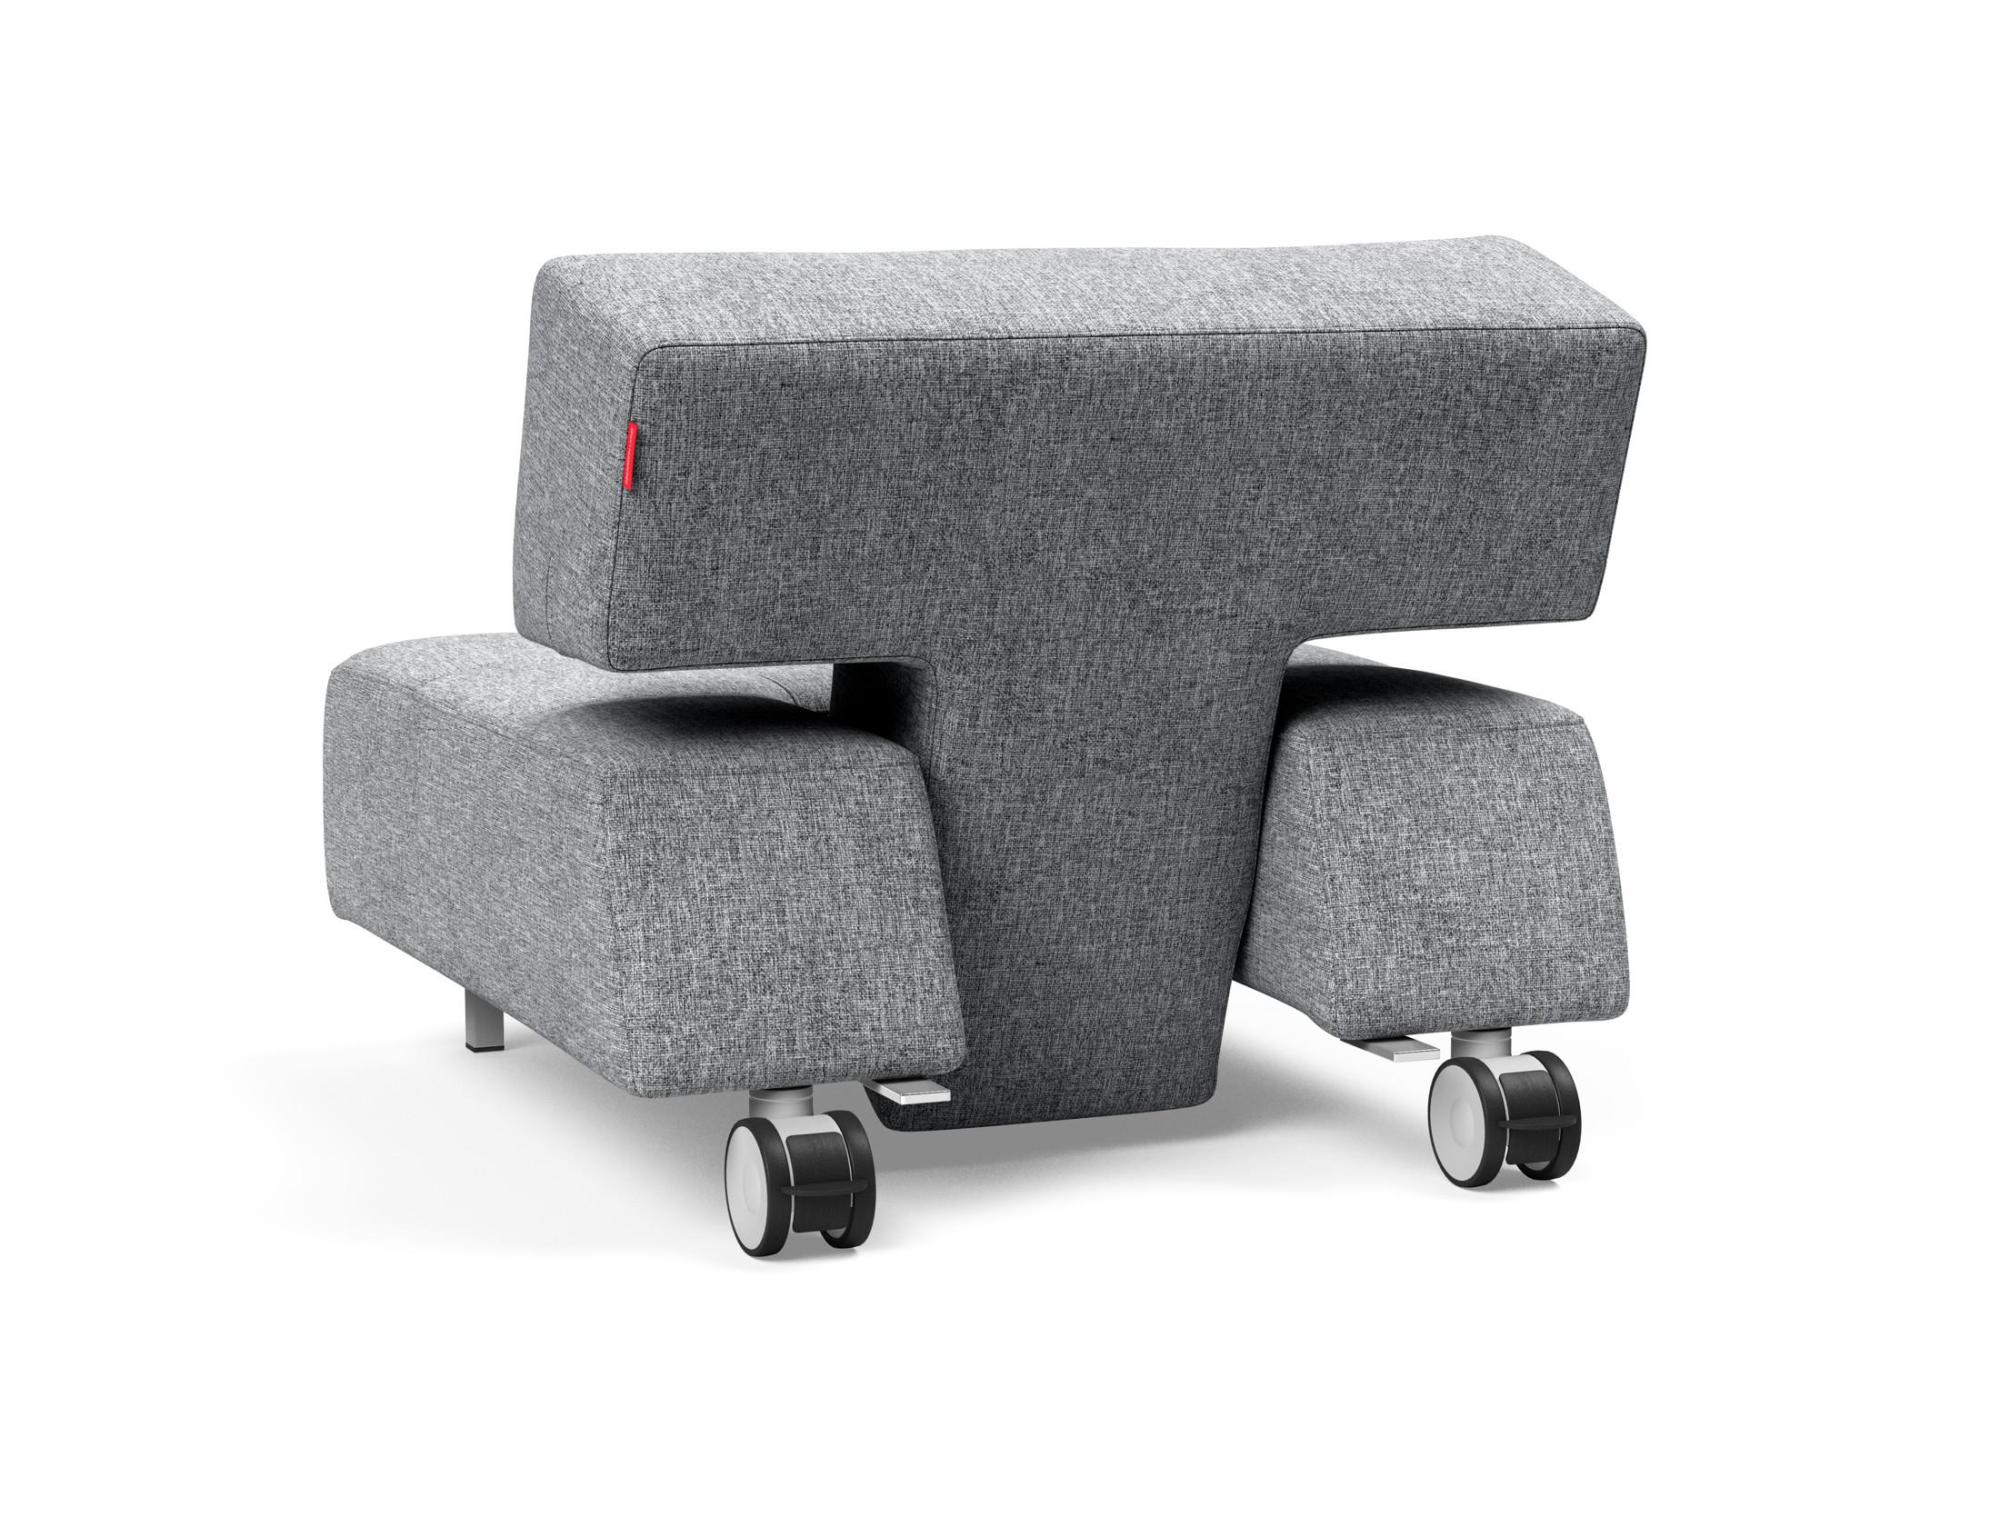 Modulares Schlafsofa Modulares Schlafsofa Horn - Sofas Lounger Innovation Excess Long